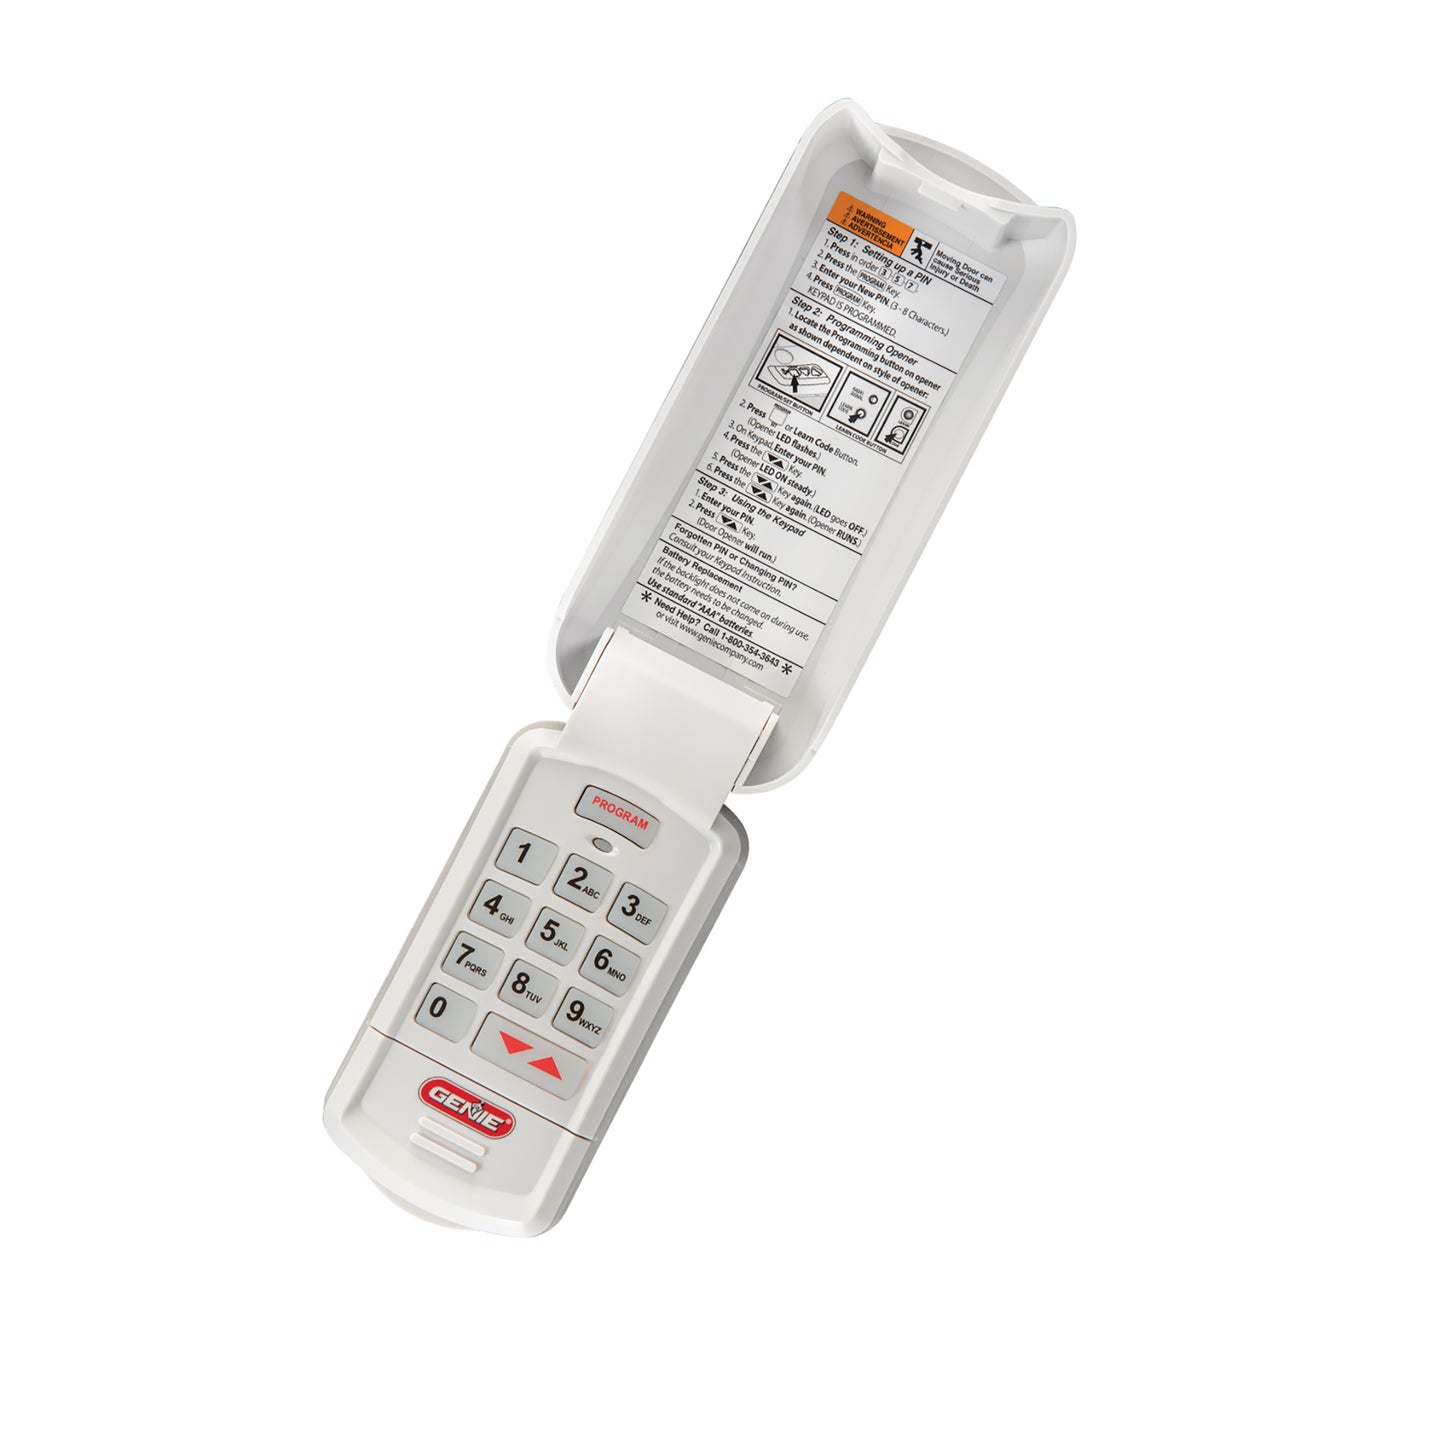 Genie GK-R wireless keypad allows for pin entry to the garage